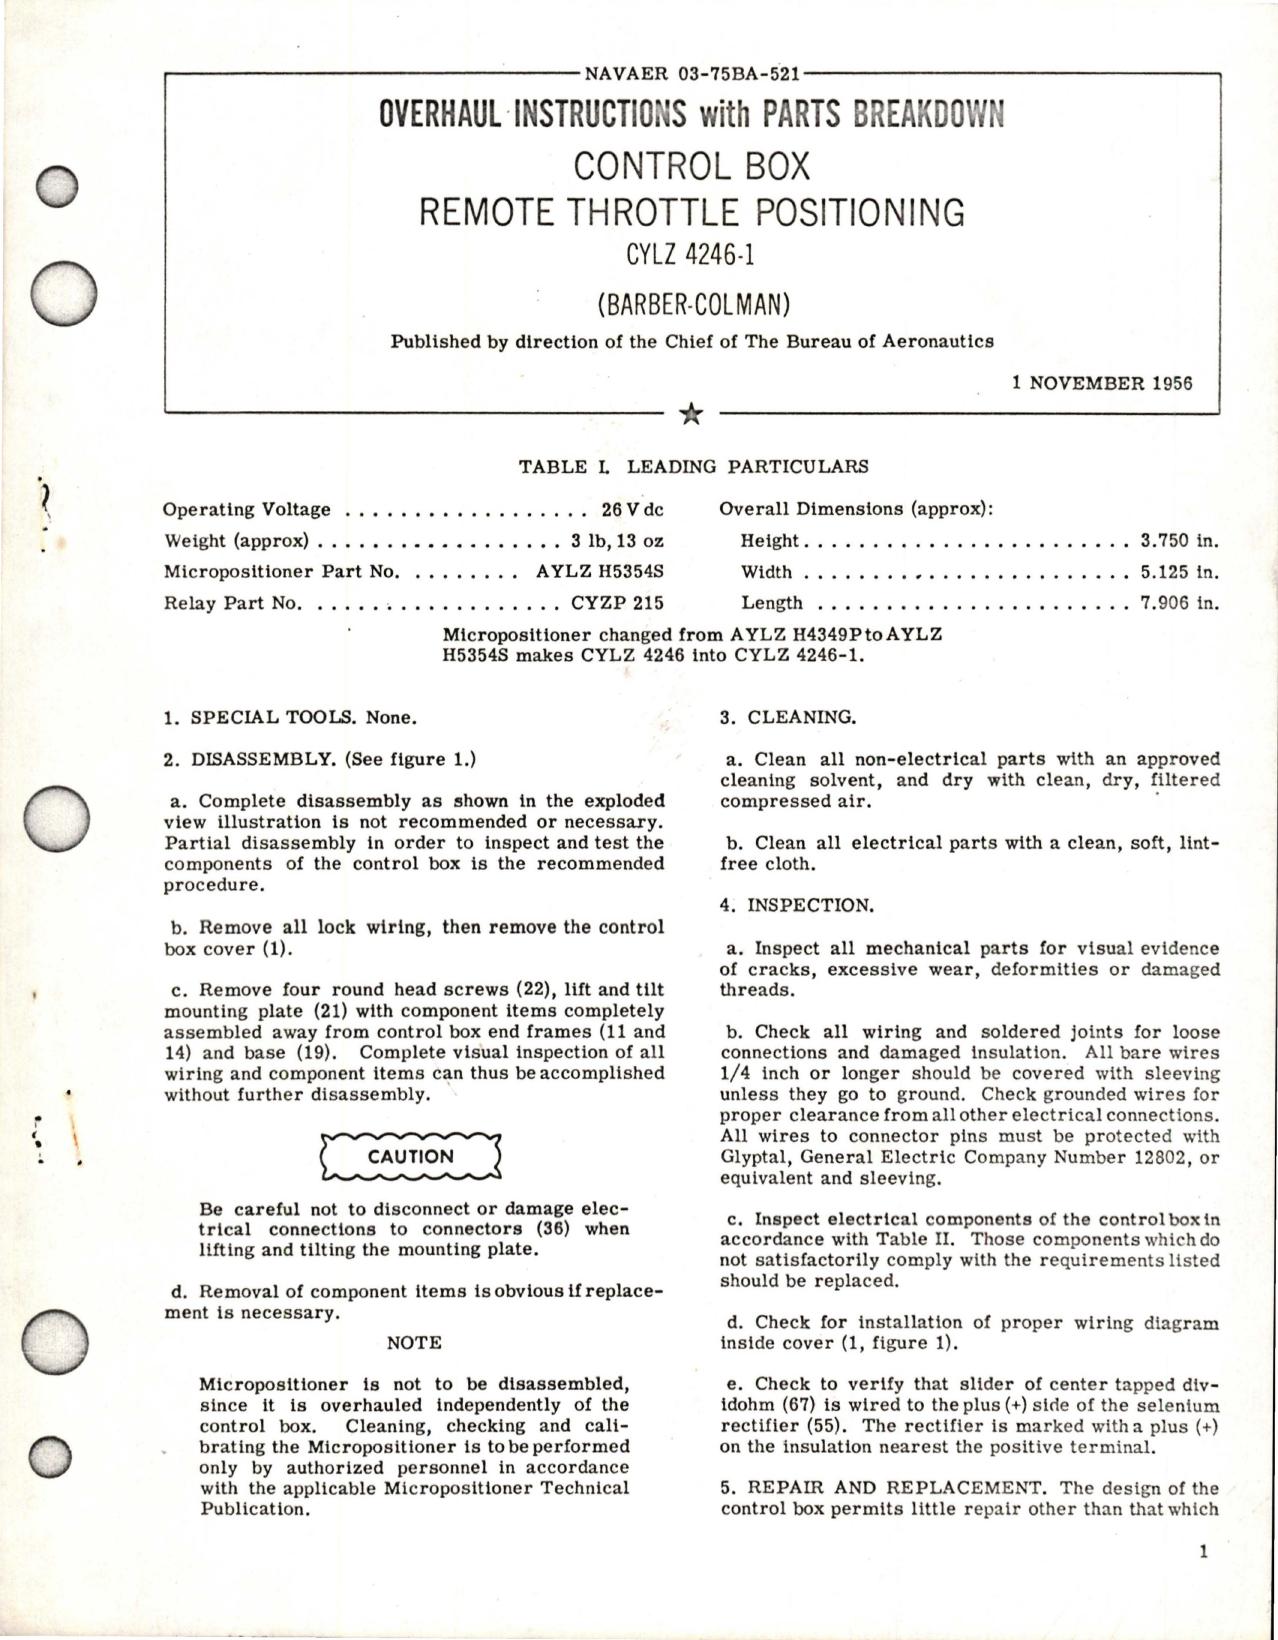 Sample page 1 from AirCorps Library document: Overhaul Instructions with Parts Breakdown for Control Box Remote Throttle Positioning - CYLZ 4246-1